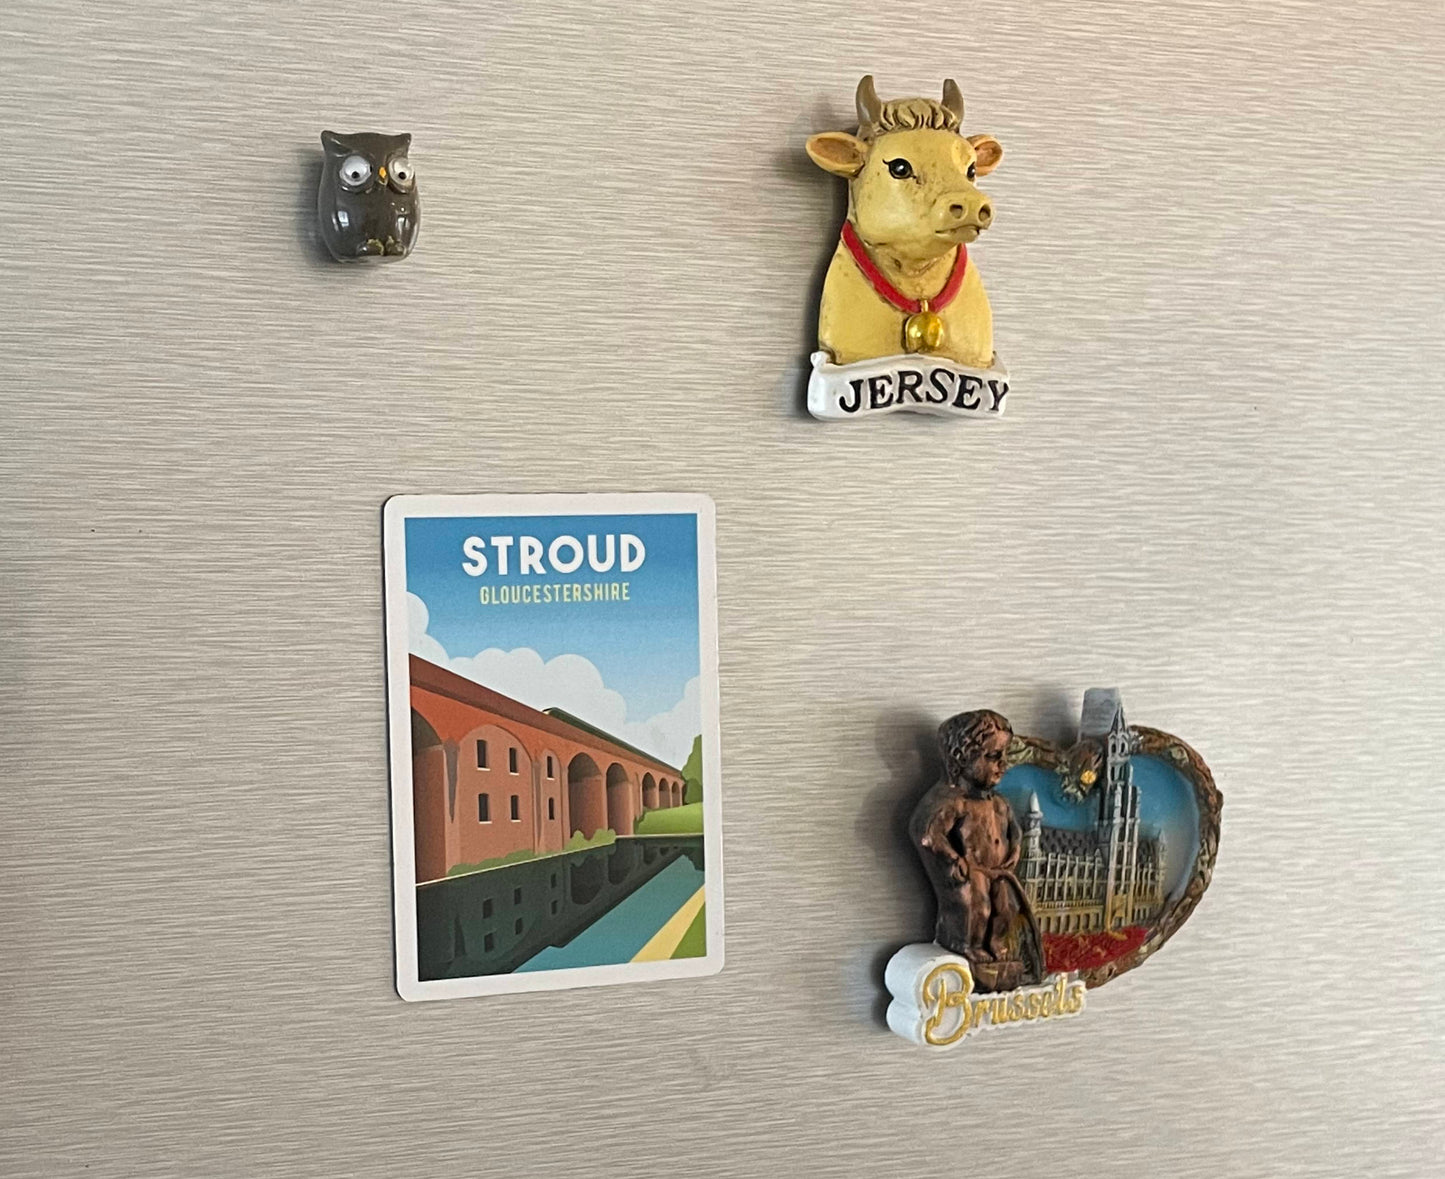 Stroud magnet on fridge with other travel magnets